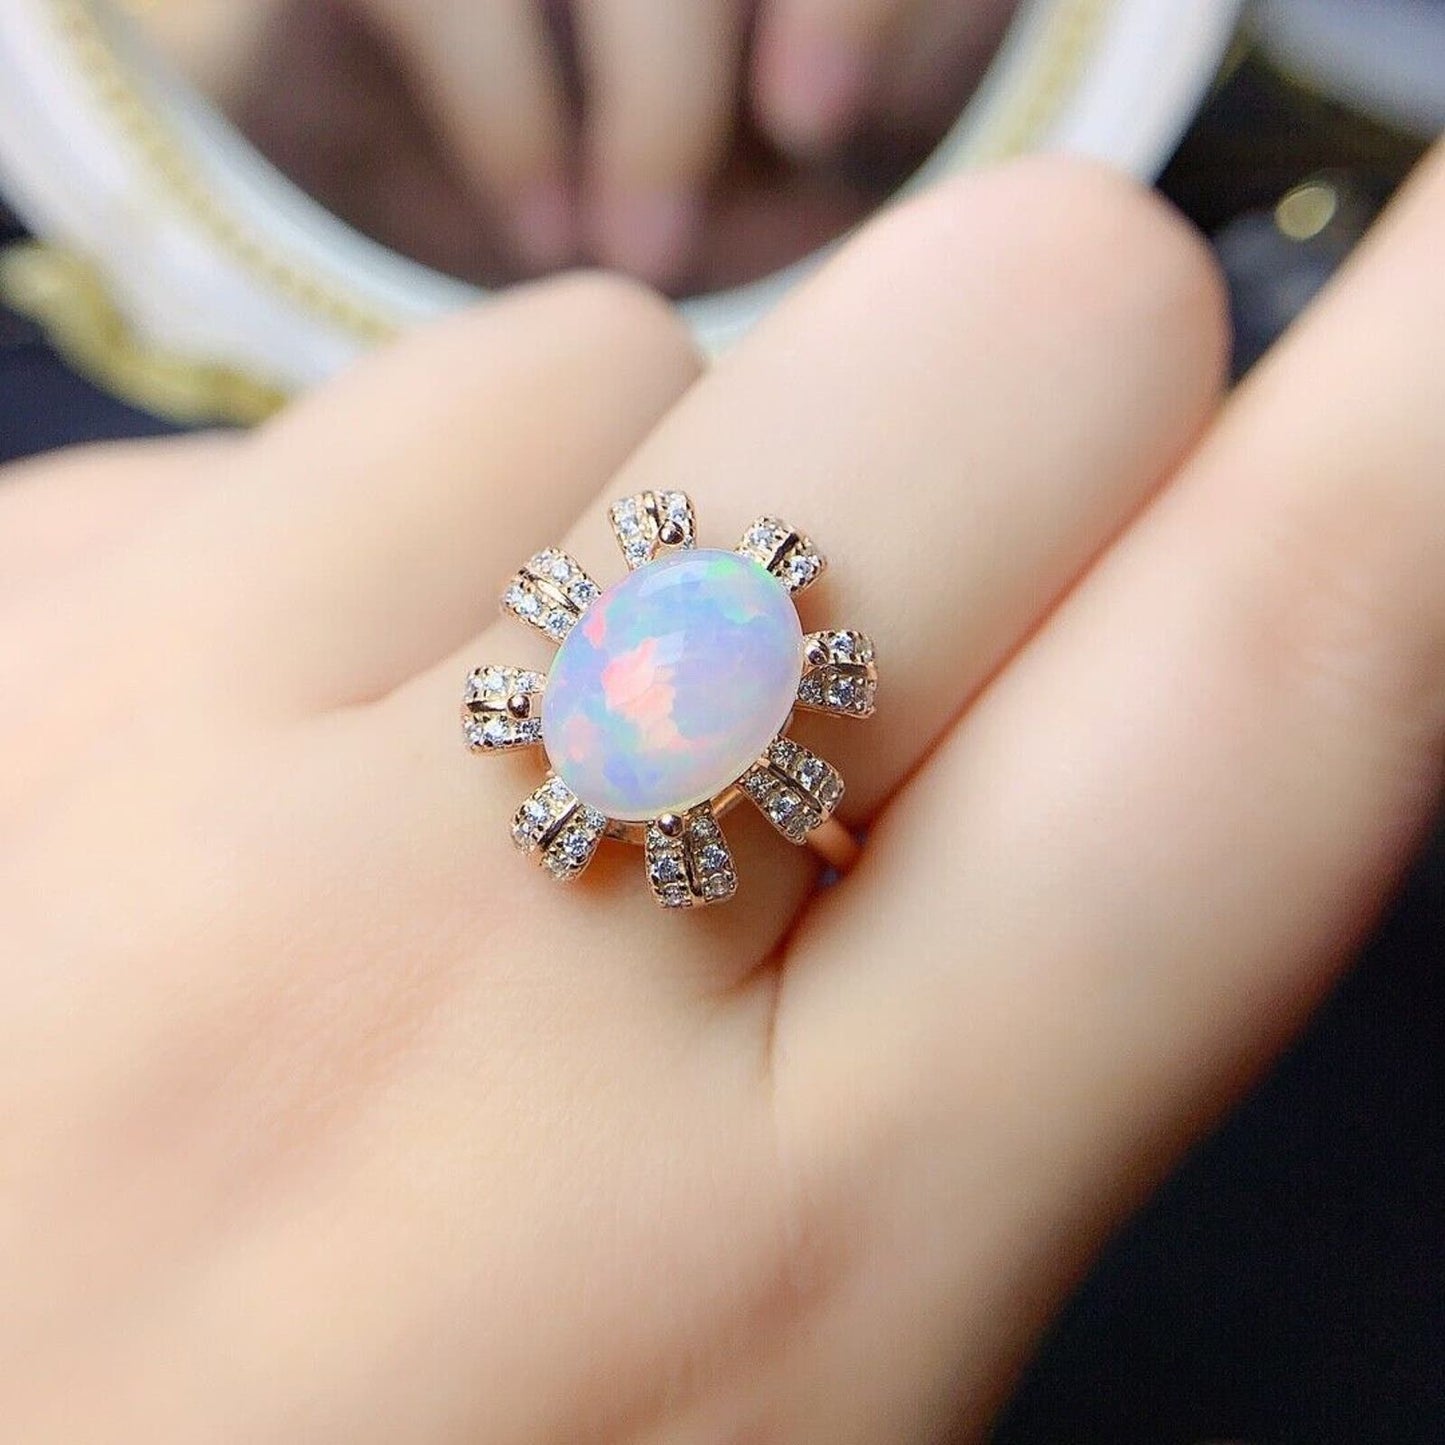 Natural Fire Opal Statement Ring 9x11mm Sterling Silver